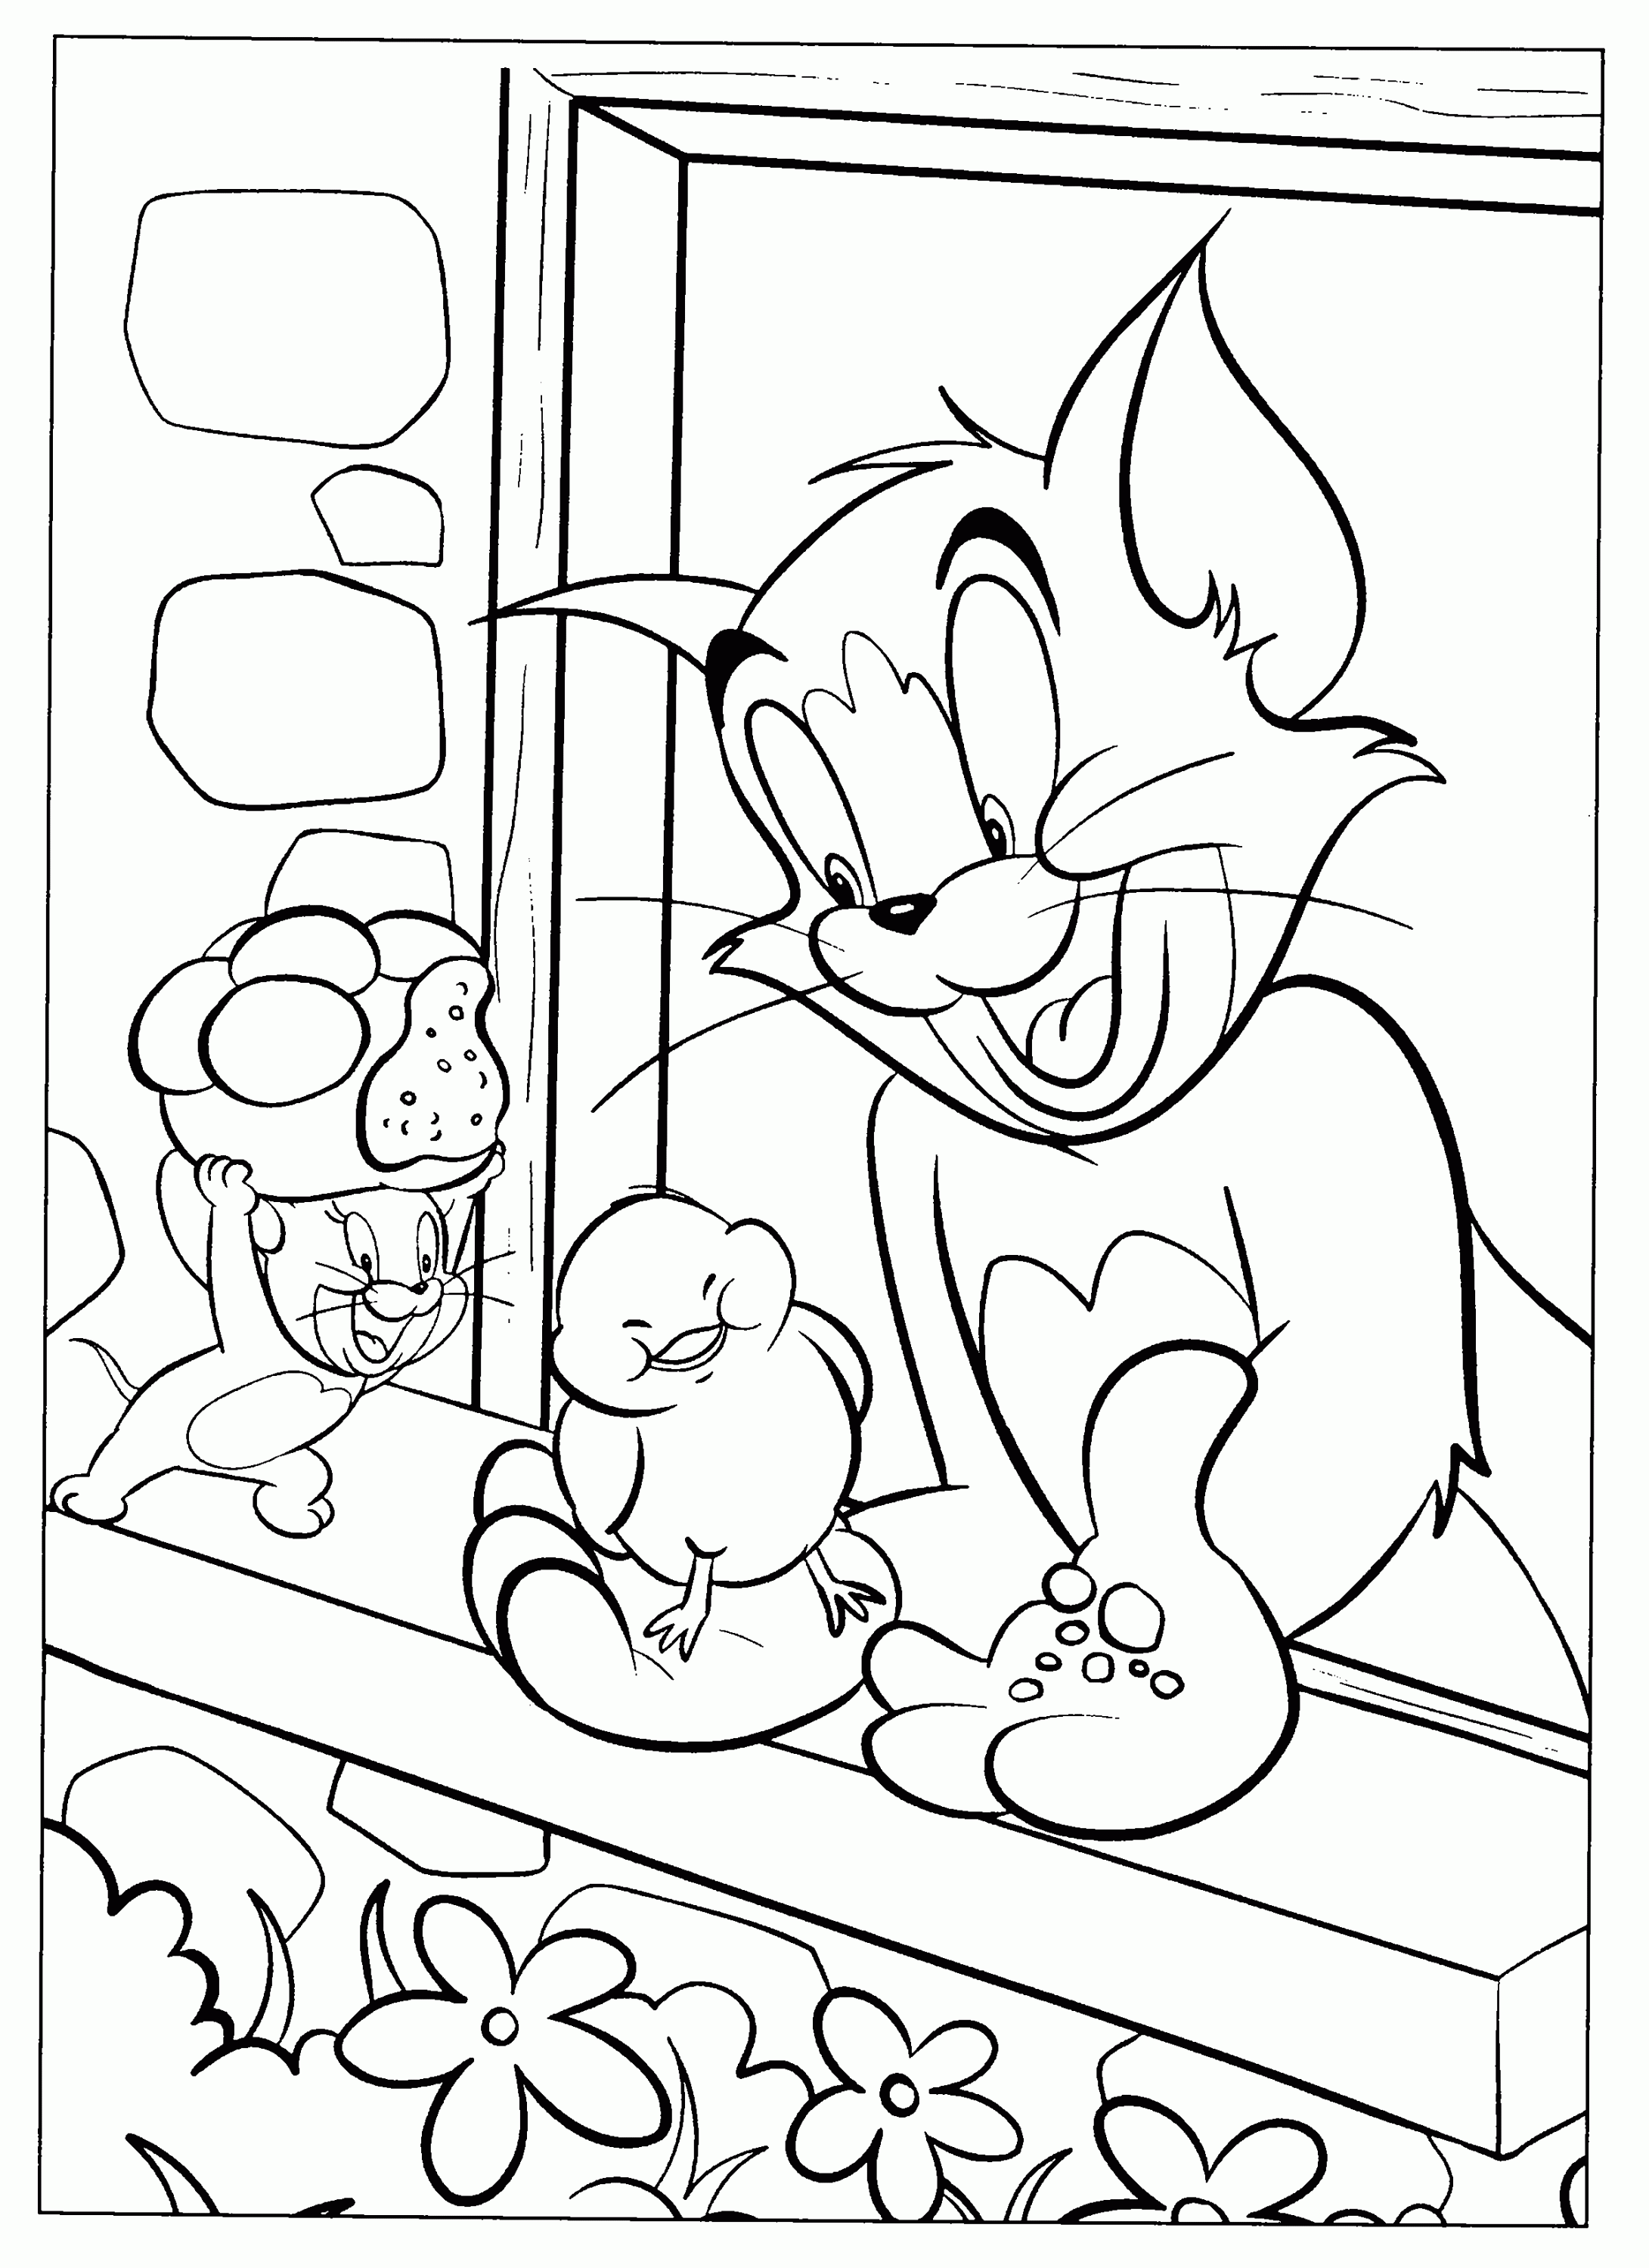 tom and jerry coloring page free